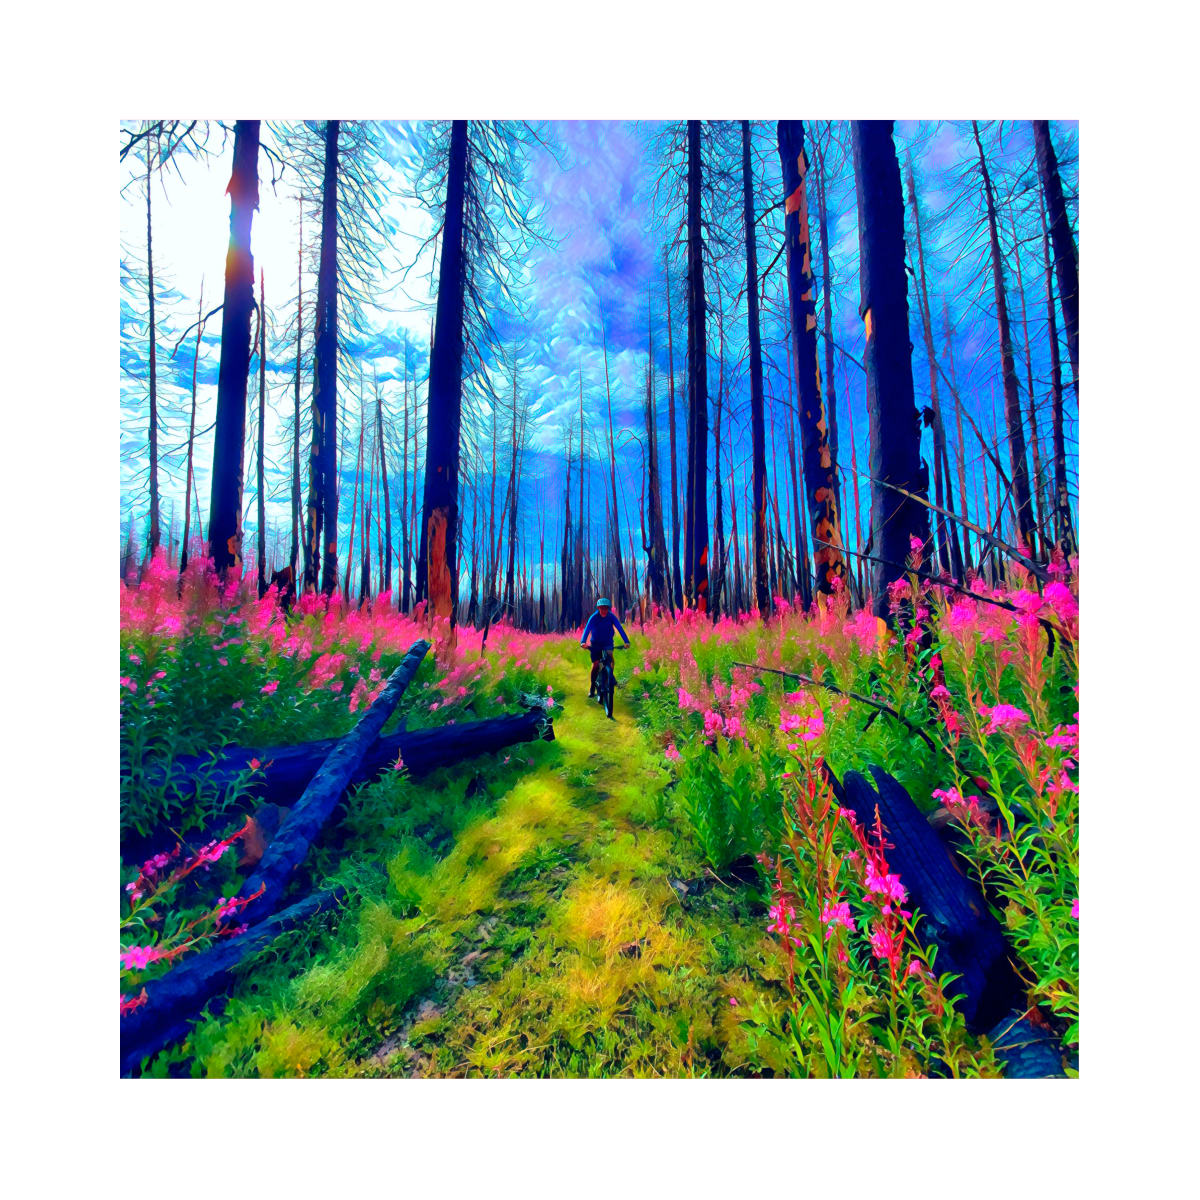 Fireweed in the charred forest. by Art Burrows  Image: Life erupts out of the charred remains of the lodge pole forest.